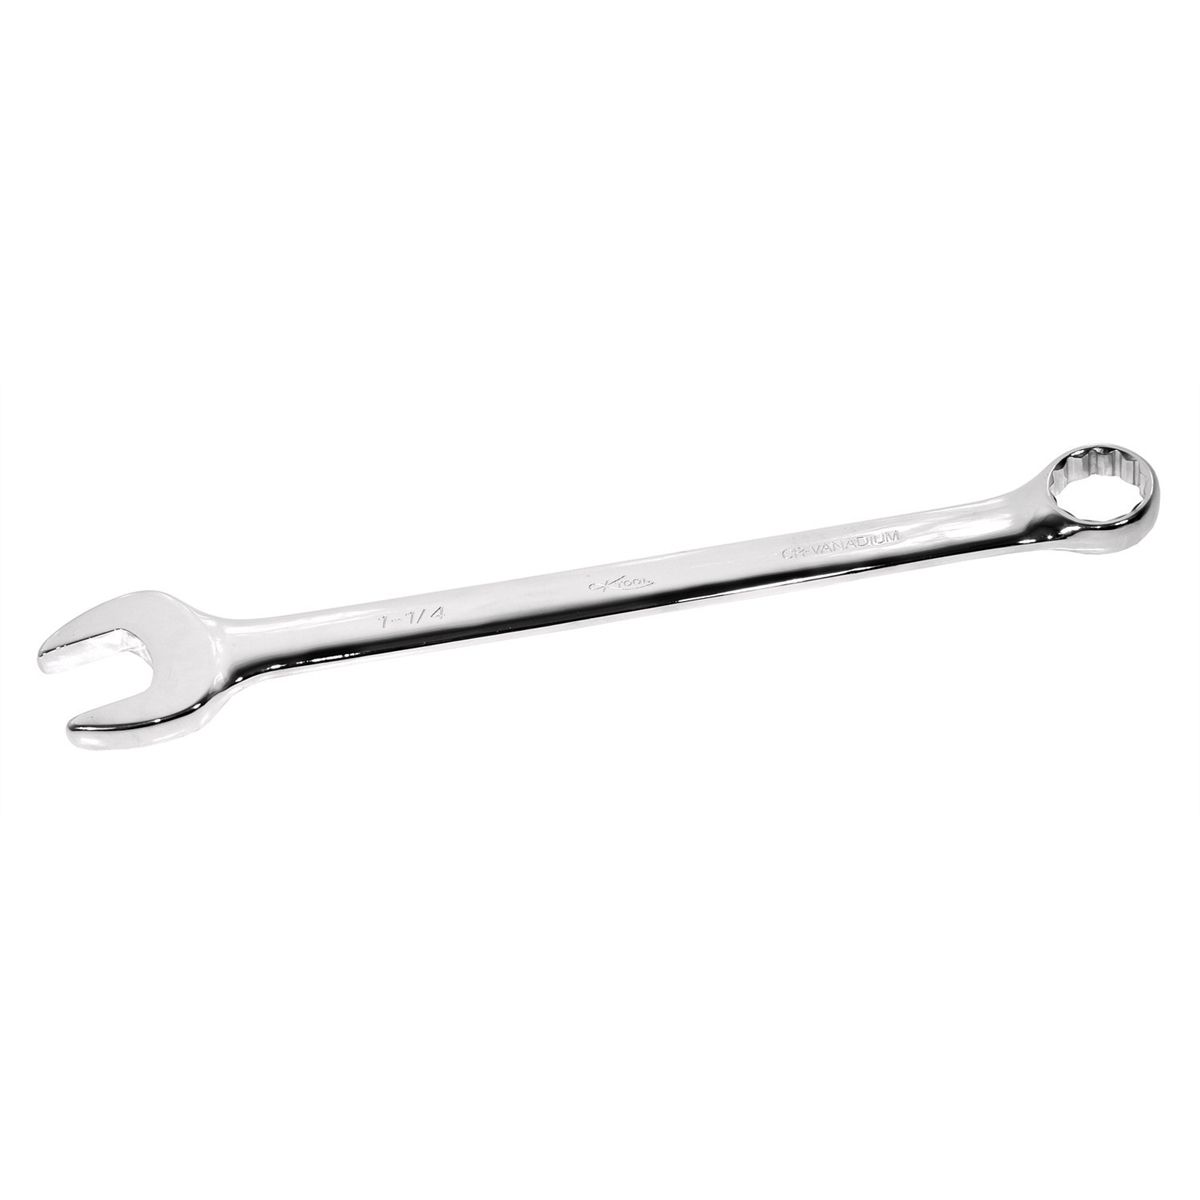 12 Point High Polish Combination Wrench 1-1/4"